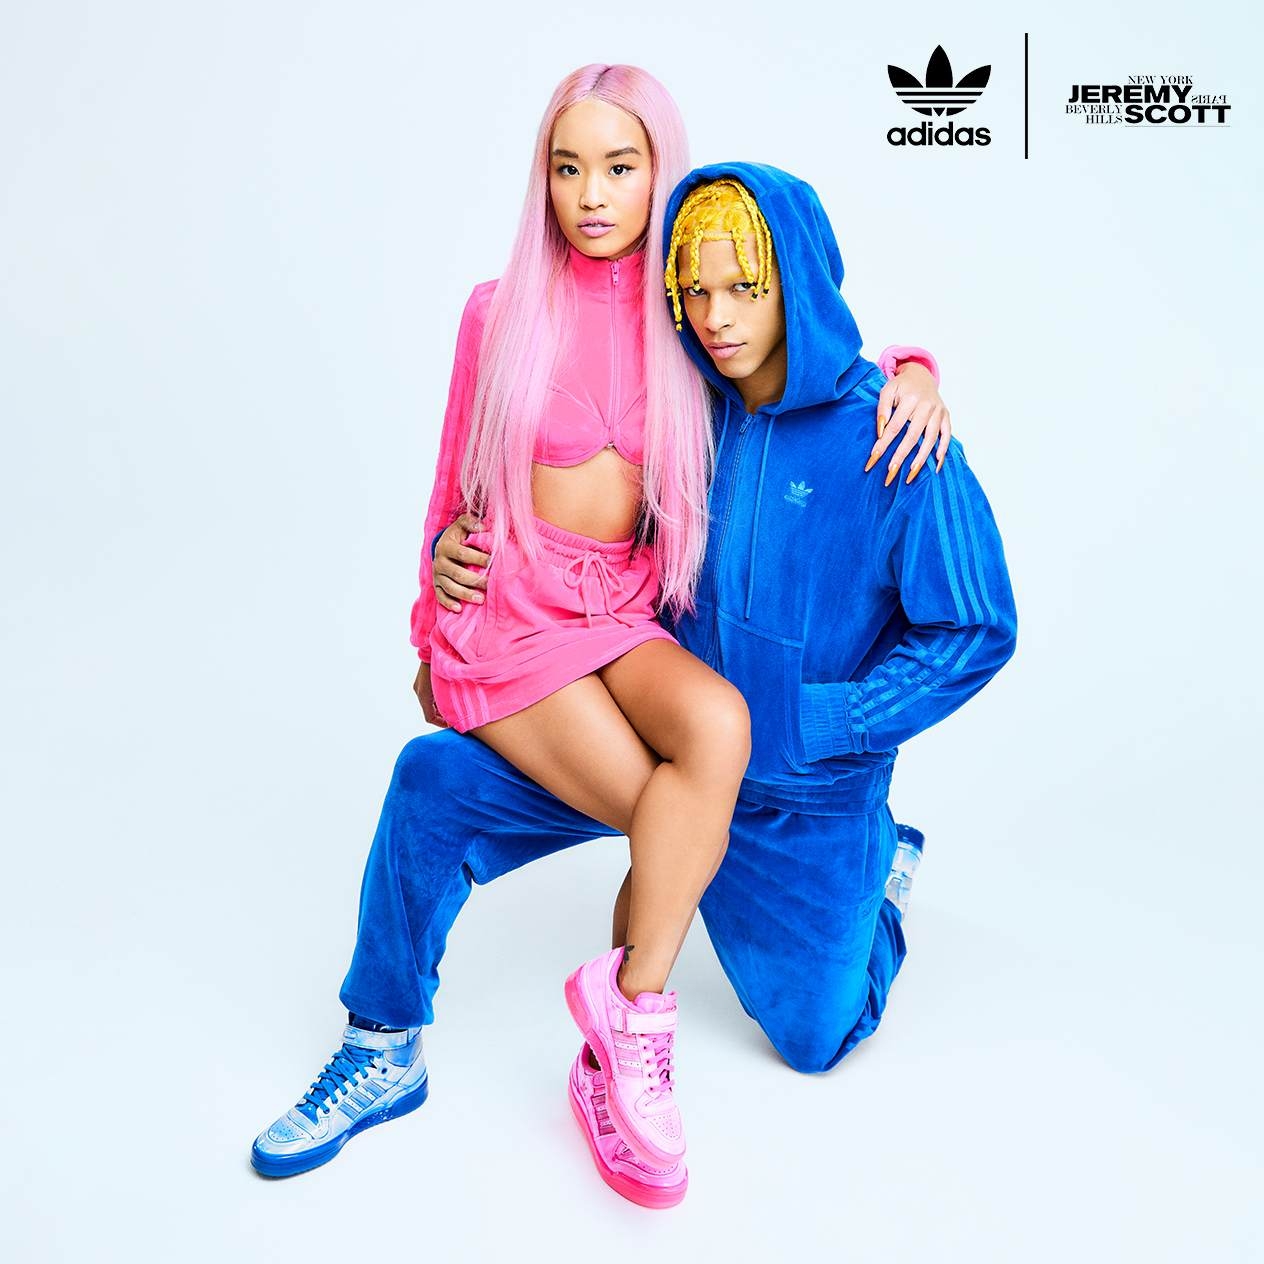 CoqCreative power by ProductionLink s.r.l. Adidas  Jeremy Scott Adidas--Jeremy-Scott  Adidas  Jeremy Scott